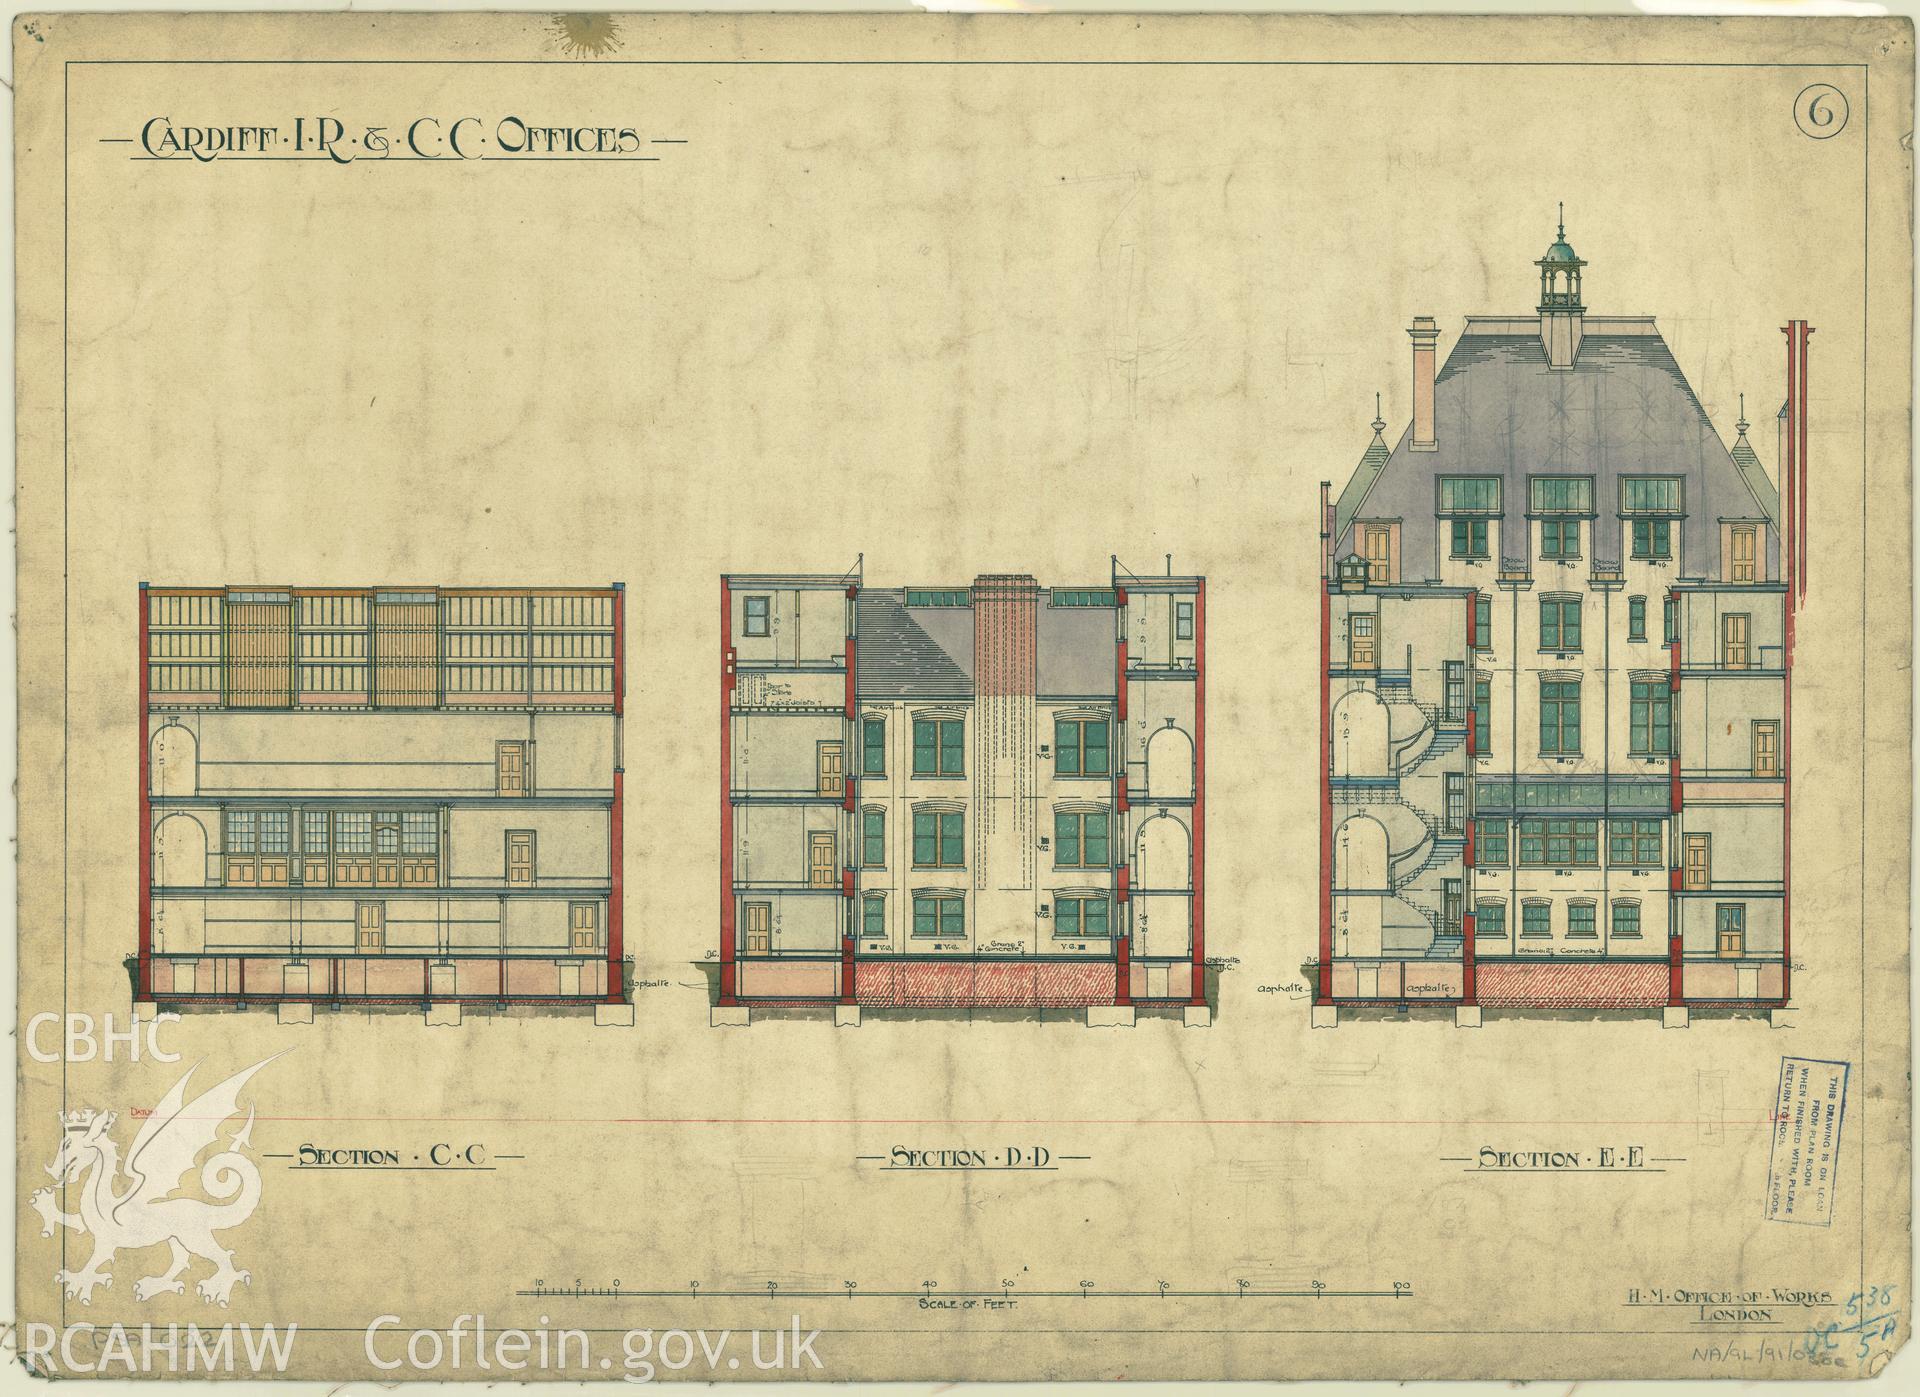 Cardiff Inland Revenue and County Court Offices; measured drawing showing section views, produced by H.M. Office of Works,  undated.